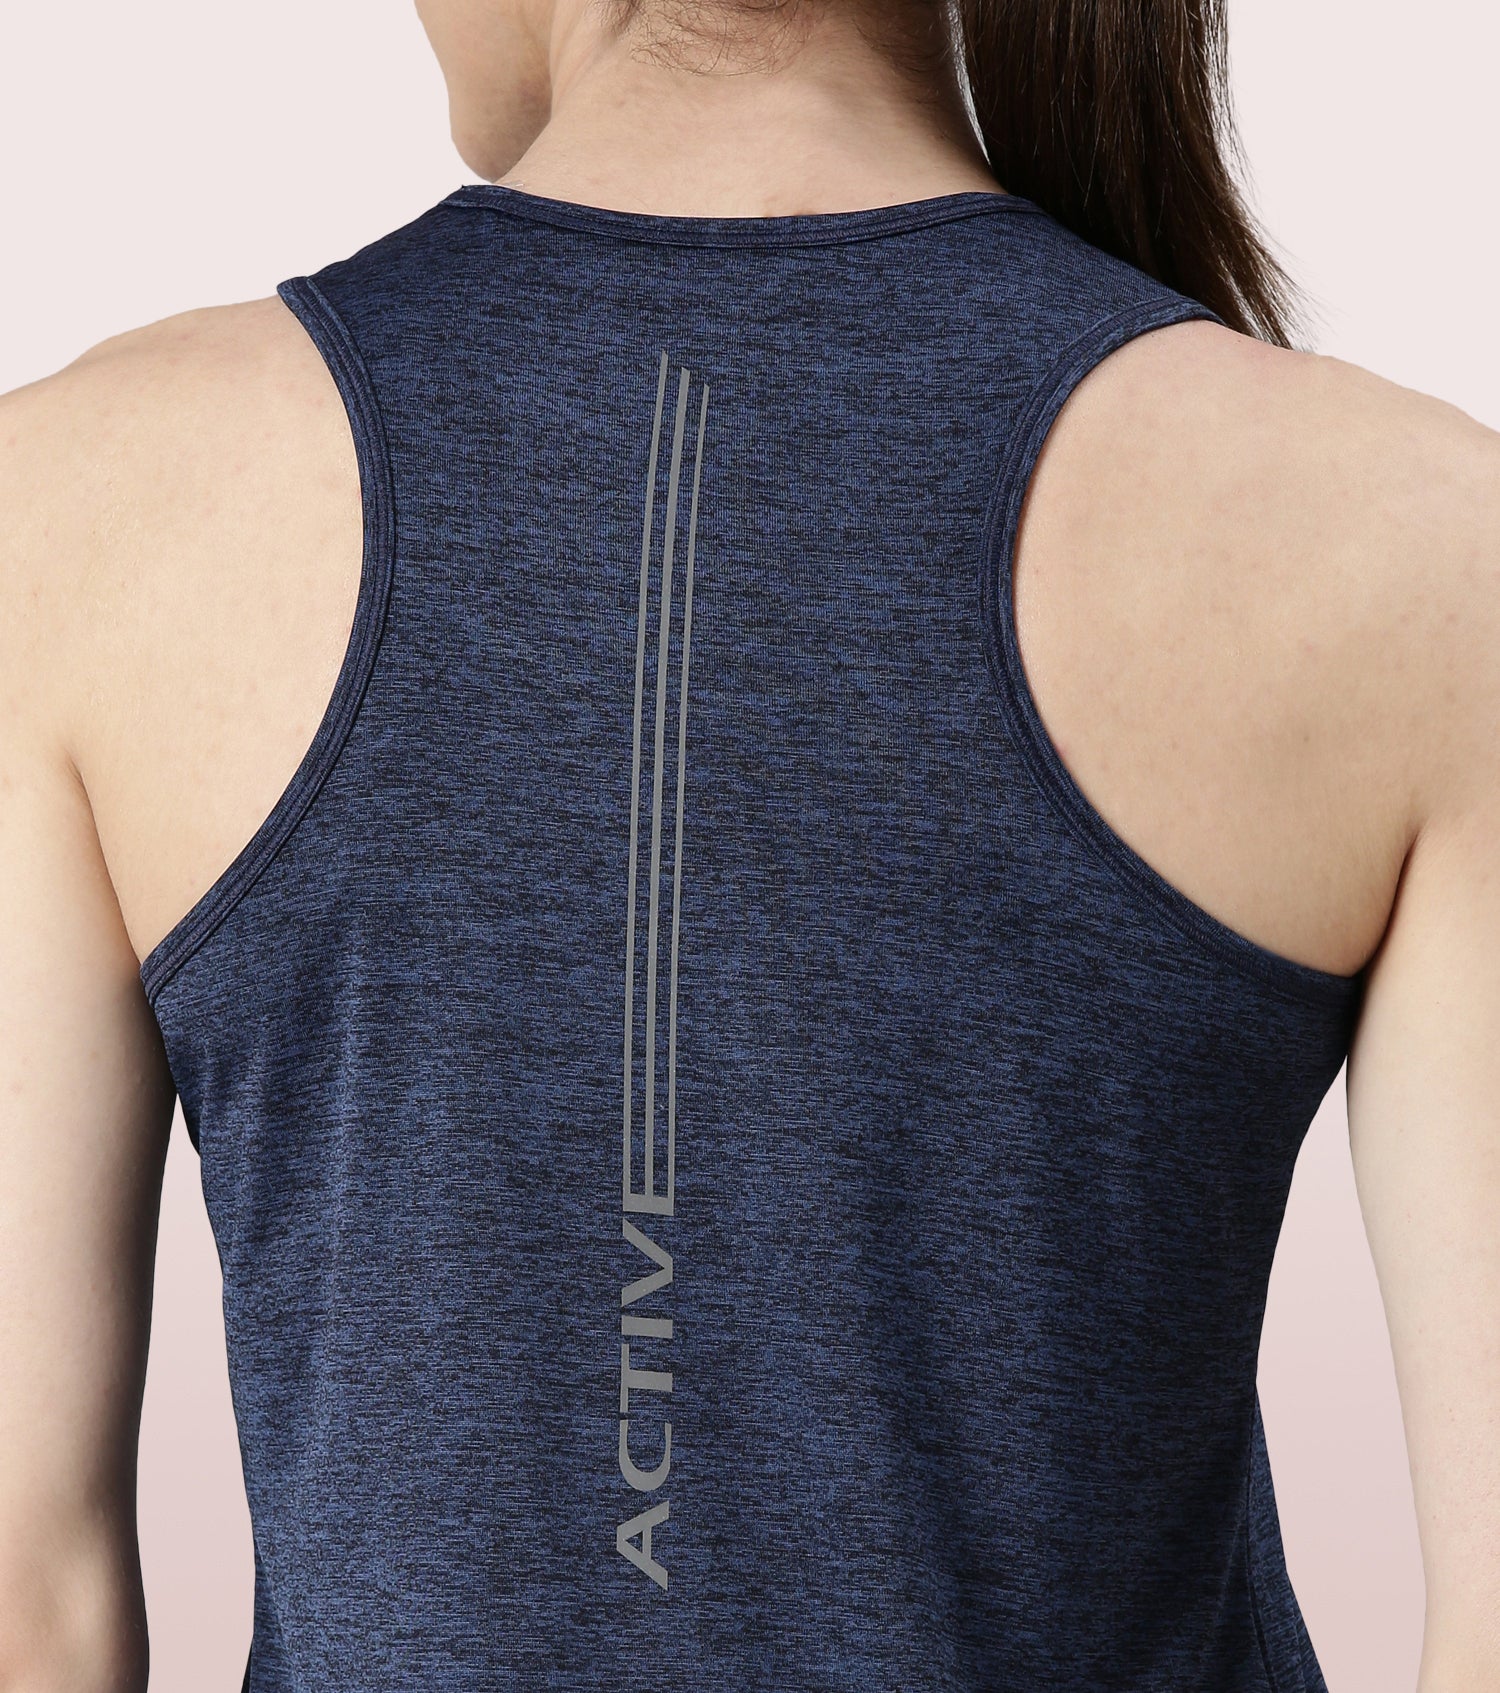 Athleisure- A308
BASIC WORKOUT TANK | DRY FIT RACER TANK WITH REFECTIVE GRAPHIC
RELAXED FIT | REGULAR LENGTH